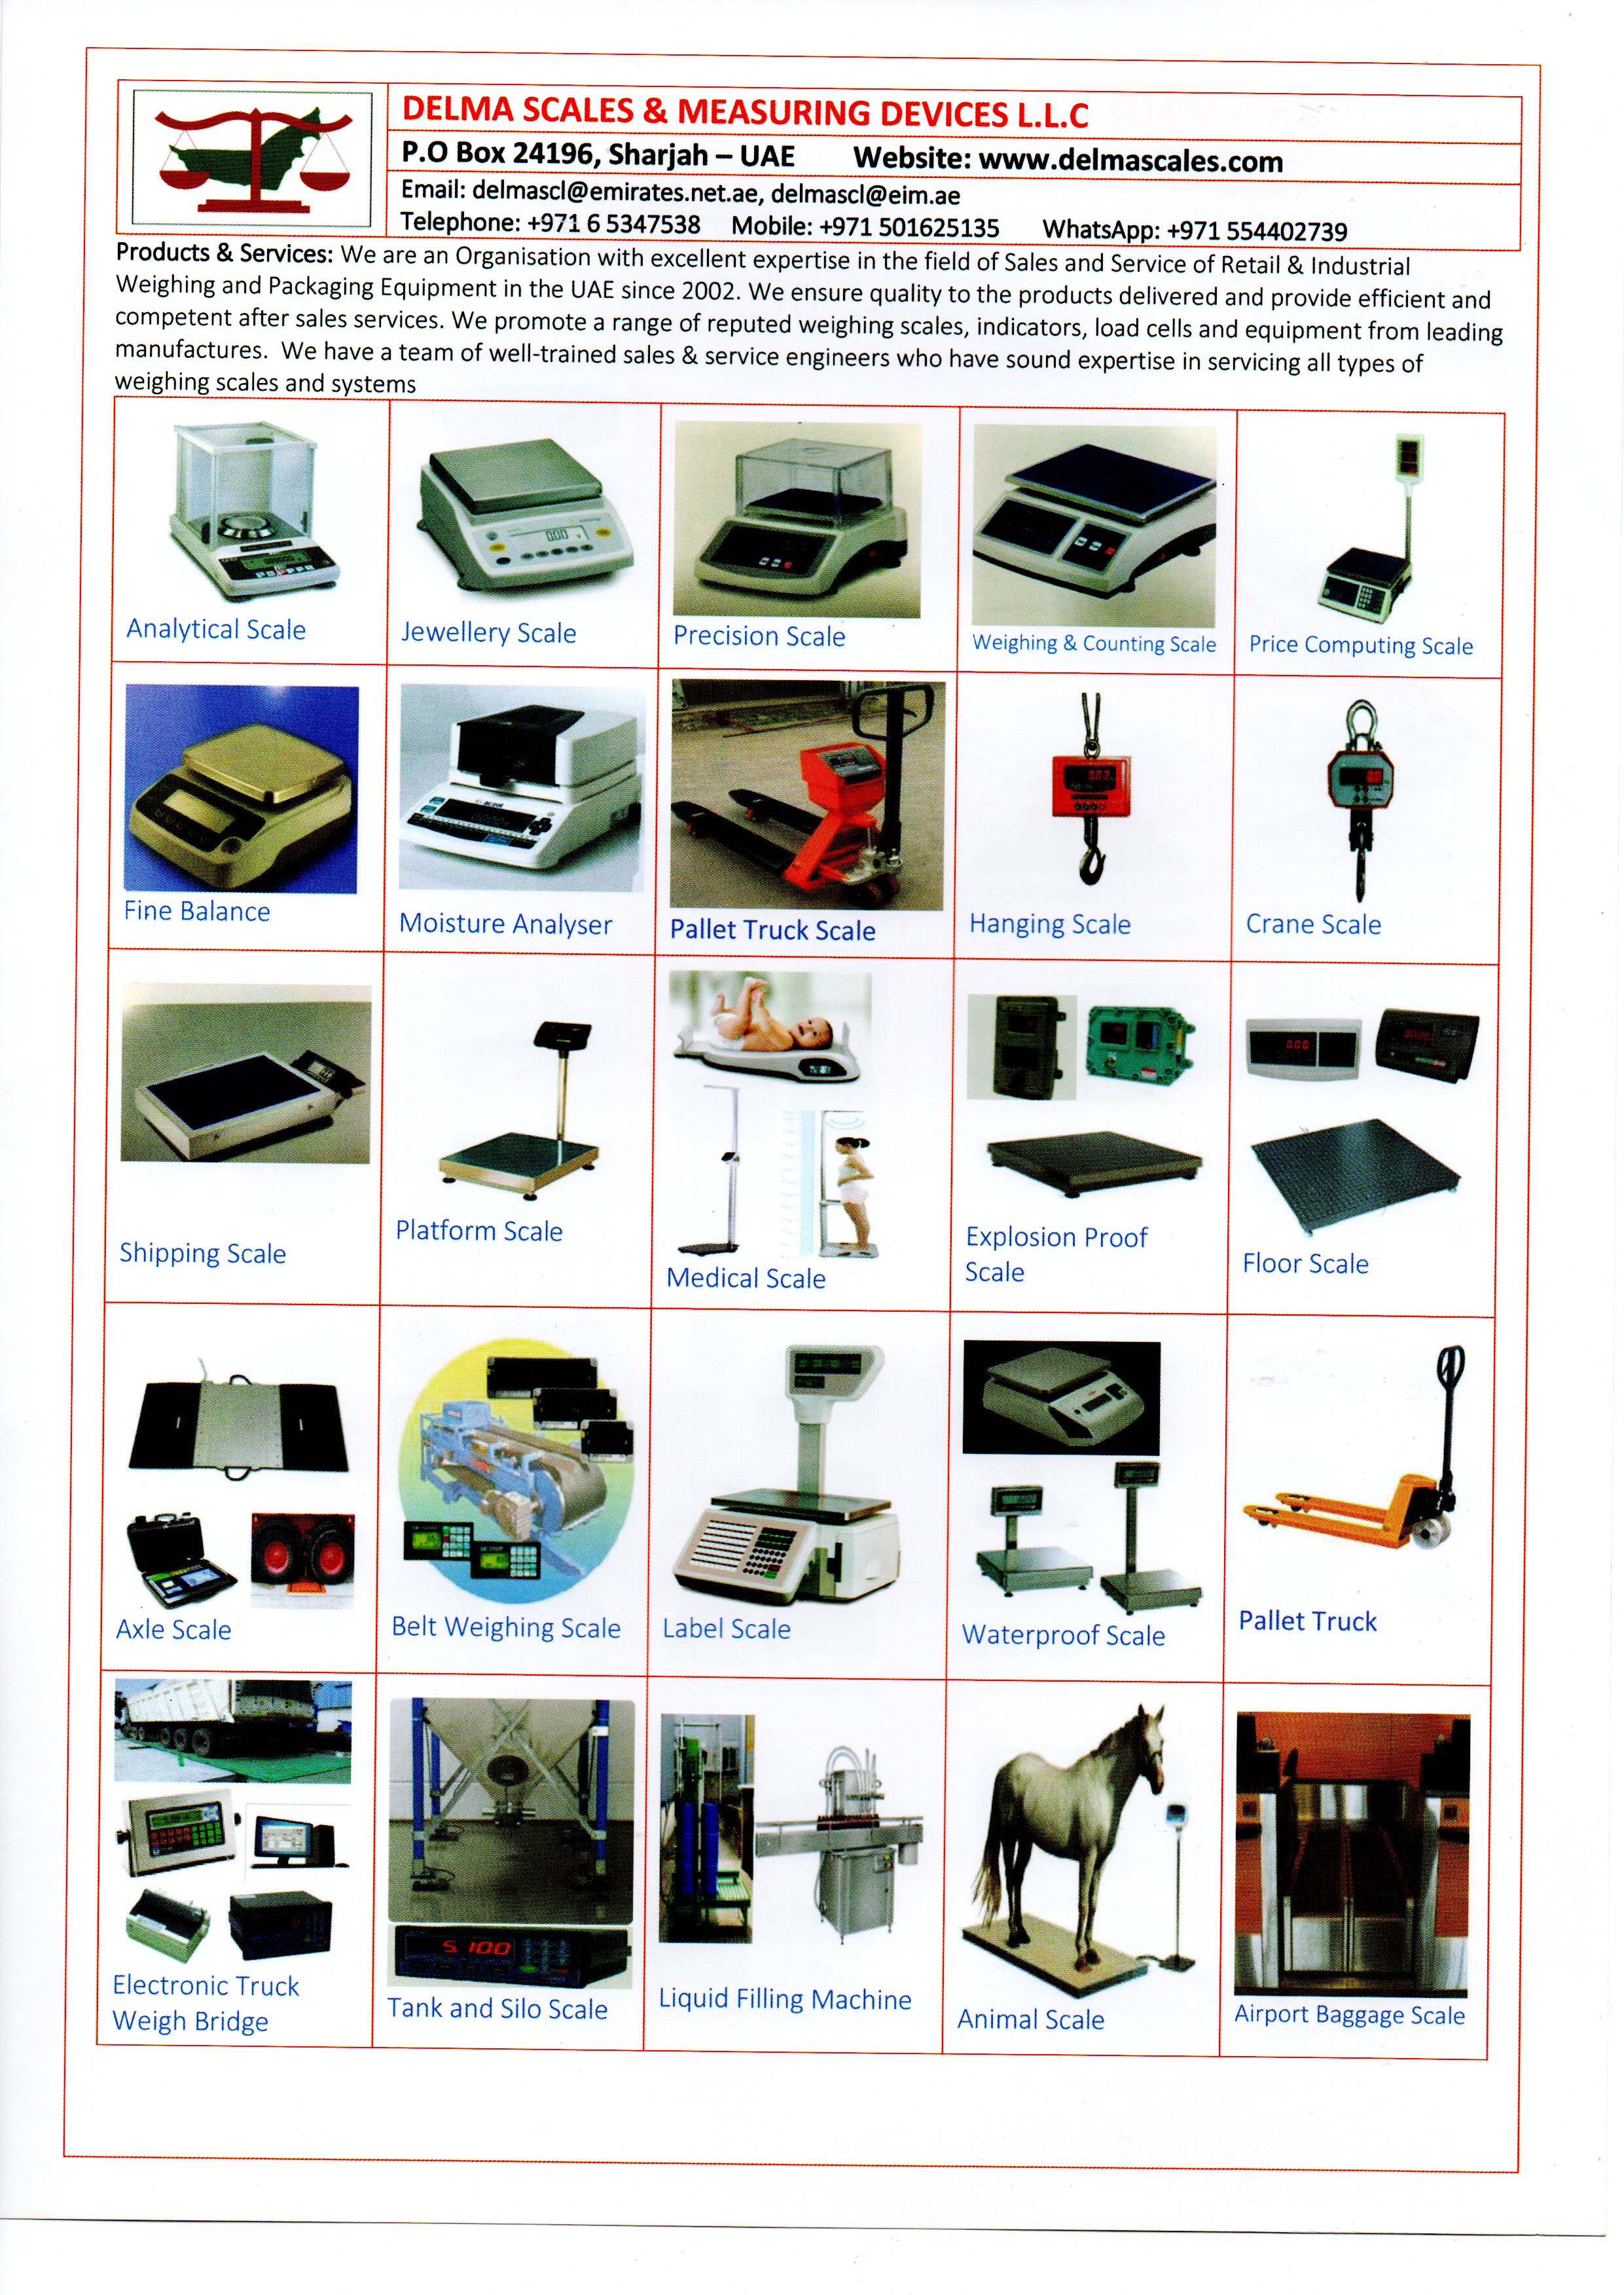 ALL TYPES OF WEIGHING EQUIPMENT,PACKAGING EQUIPMENT